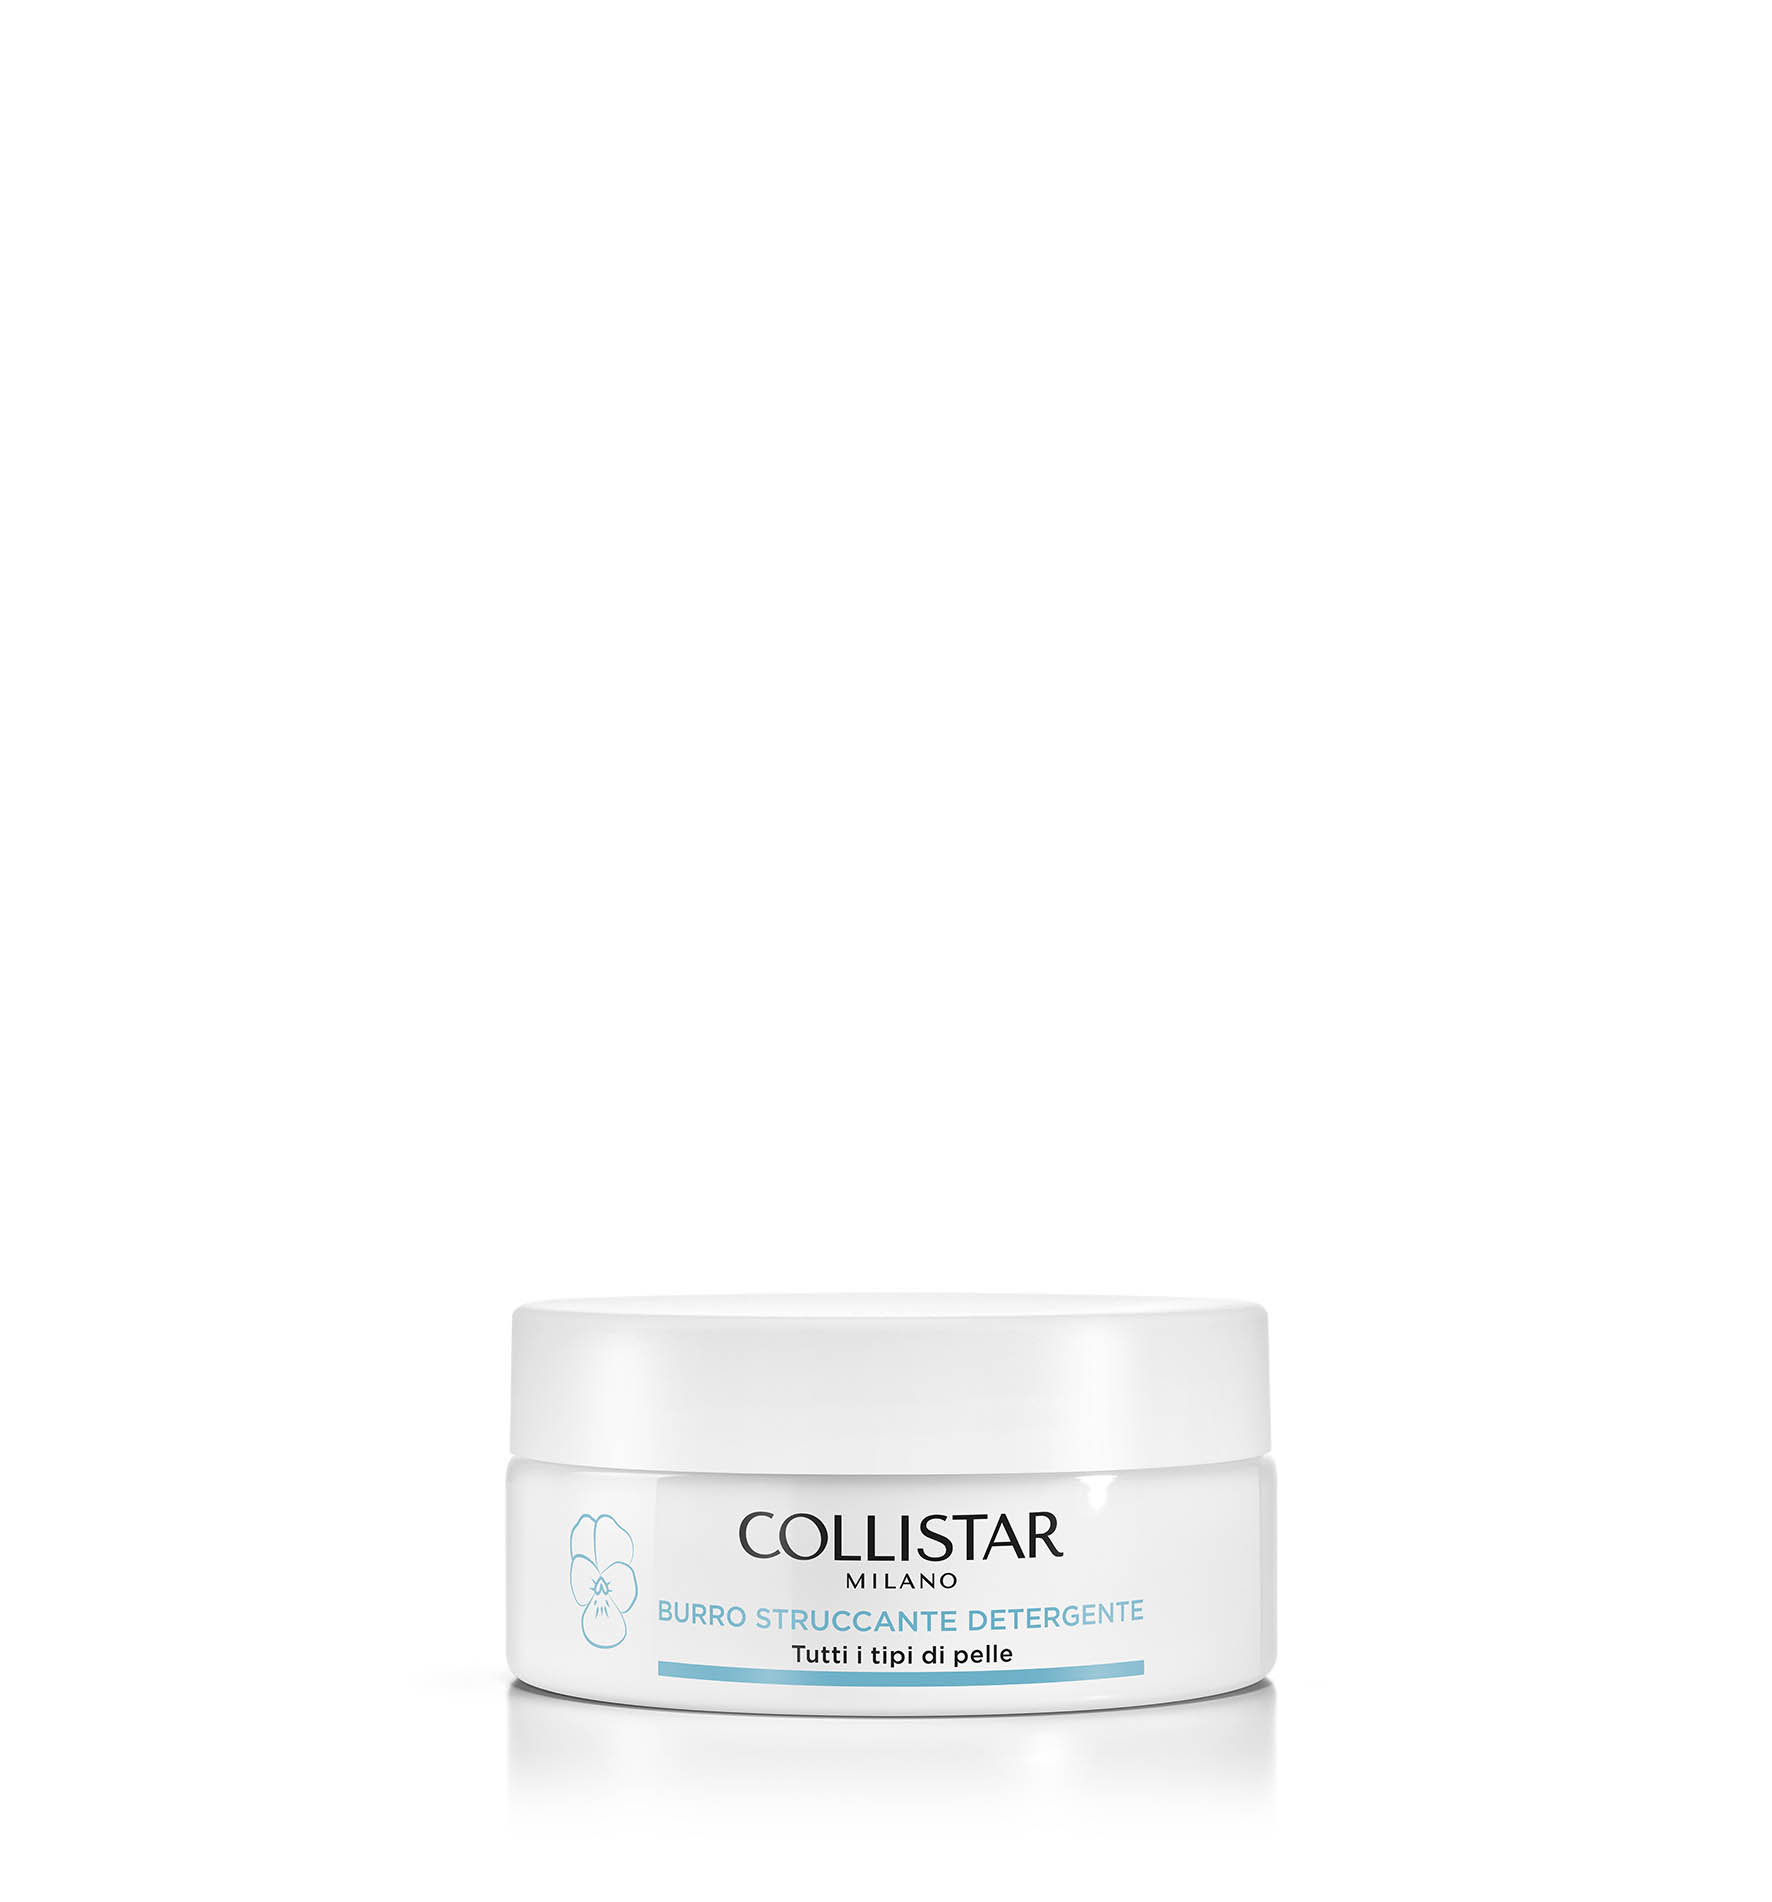 MAKE-UP REMOVING CLEANSING BALM - Dry skin | Collistar - Shop Online Ufficiale